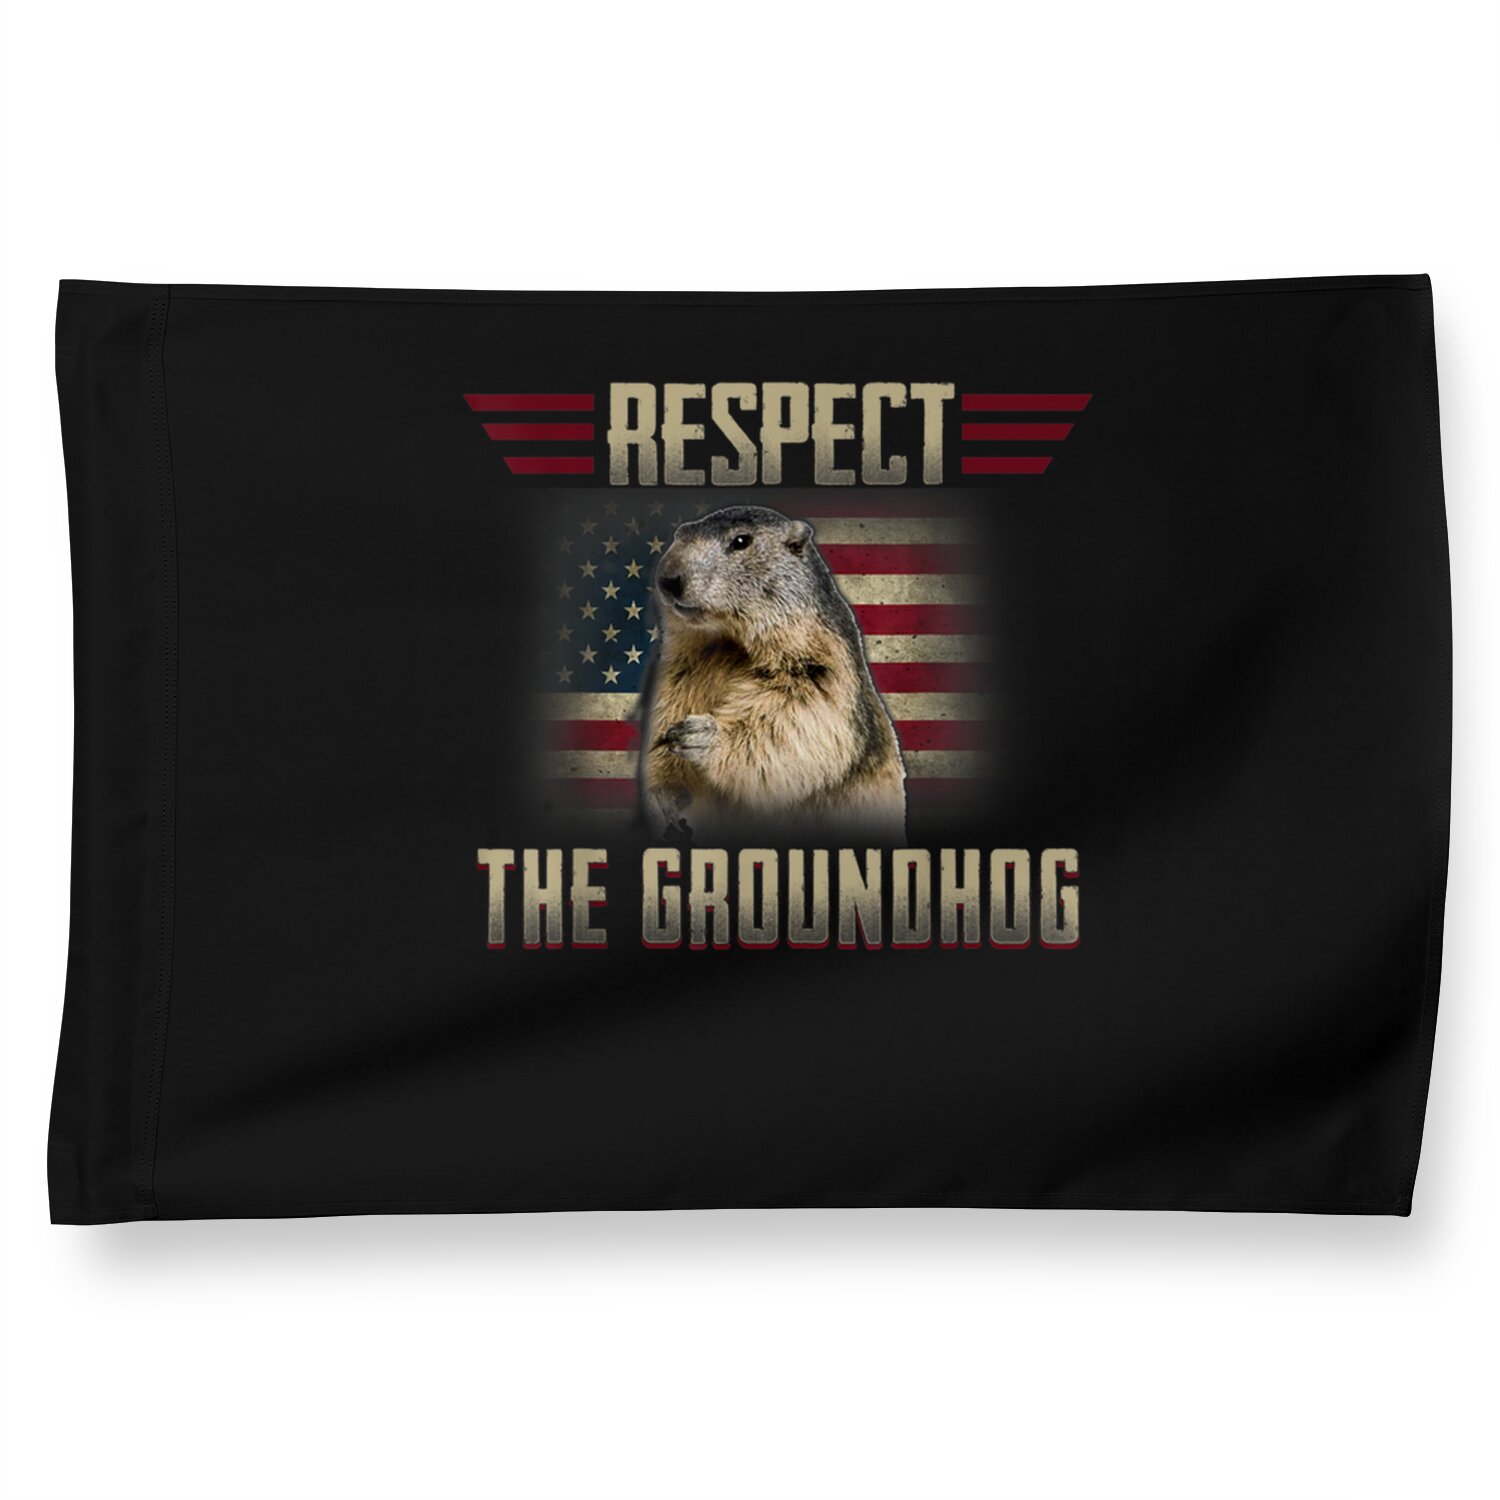 Respect The Groundhog Woodchuck Photo GroundHog Day House Flags